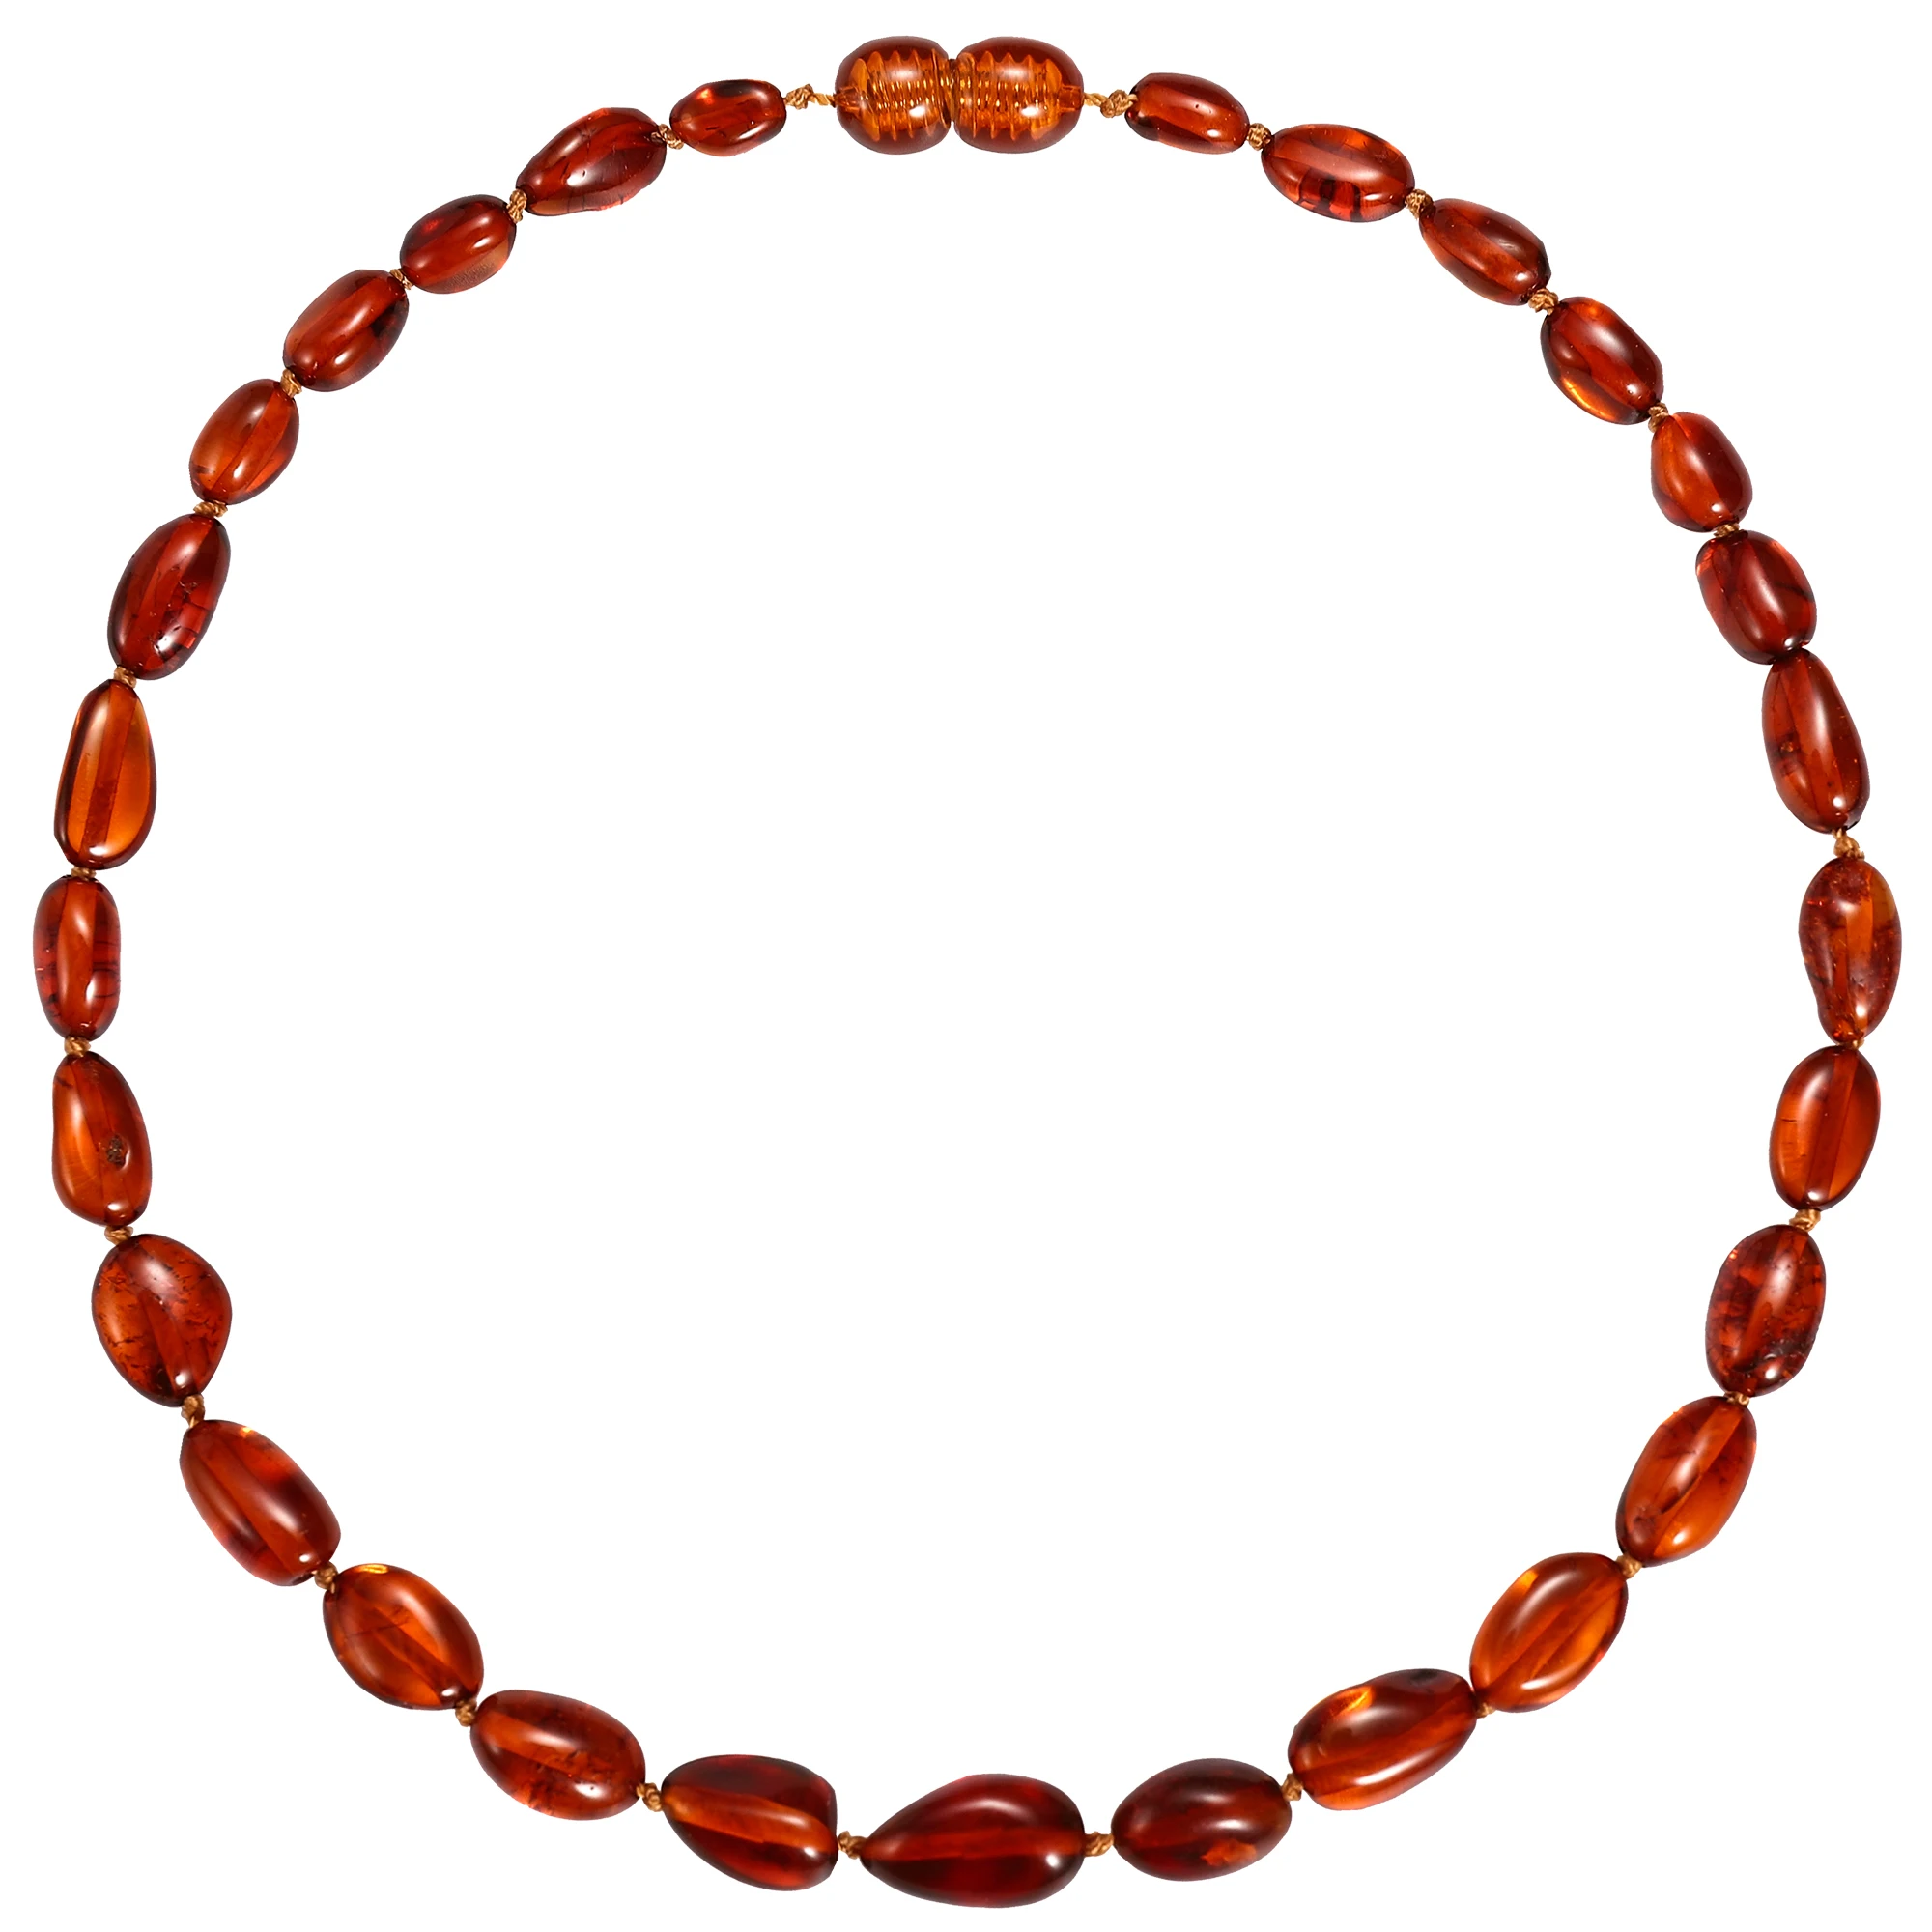 

DY New Product 2019 Baltic Amber Beads Teething Amber Necklace for Baby Raw Cognac Amber